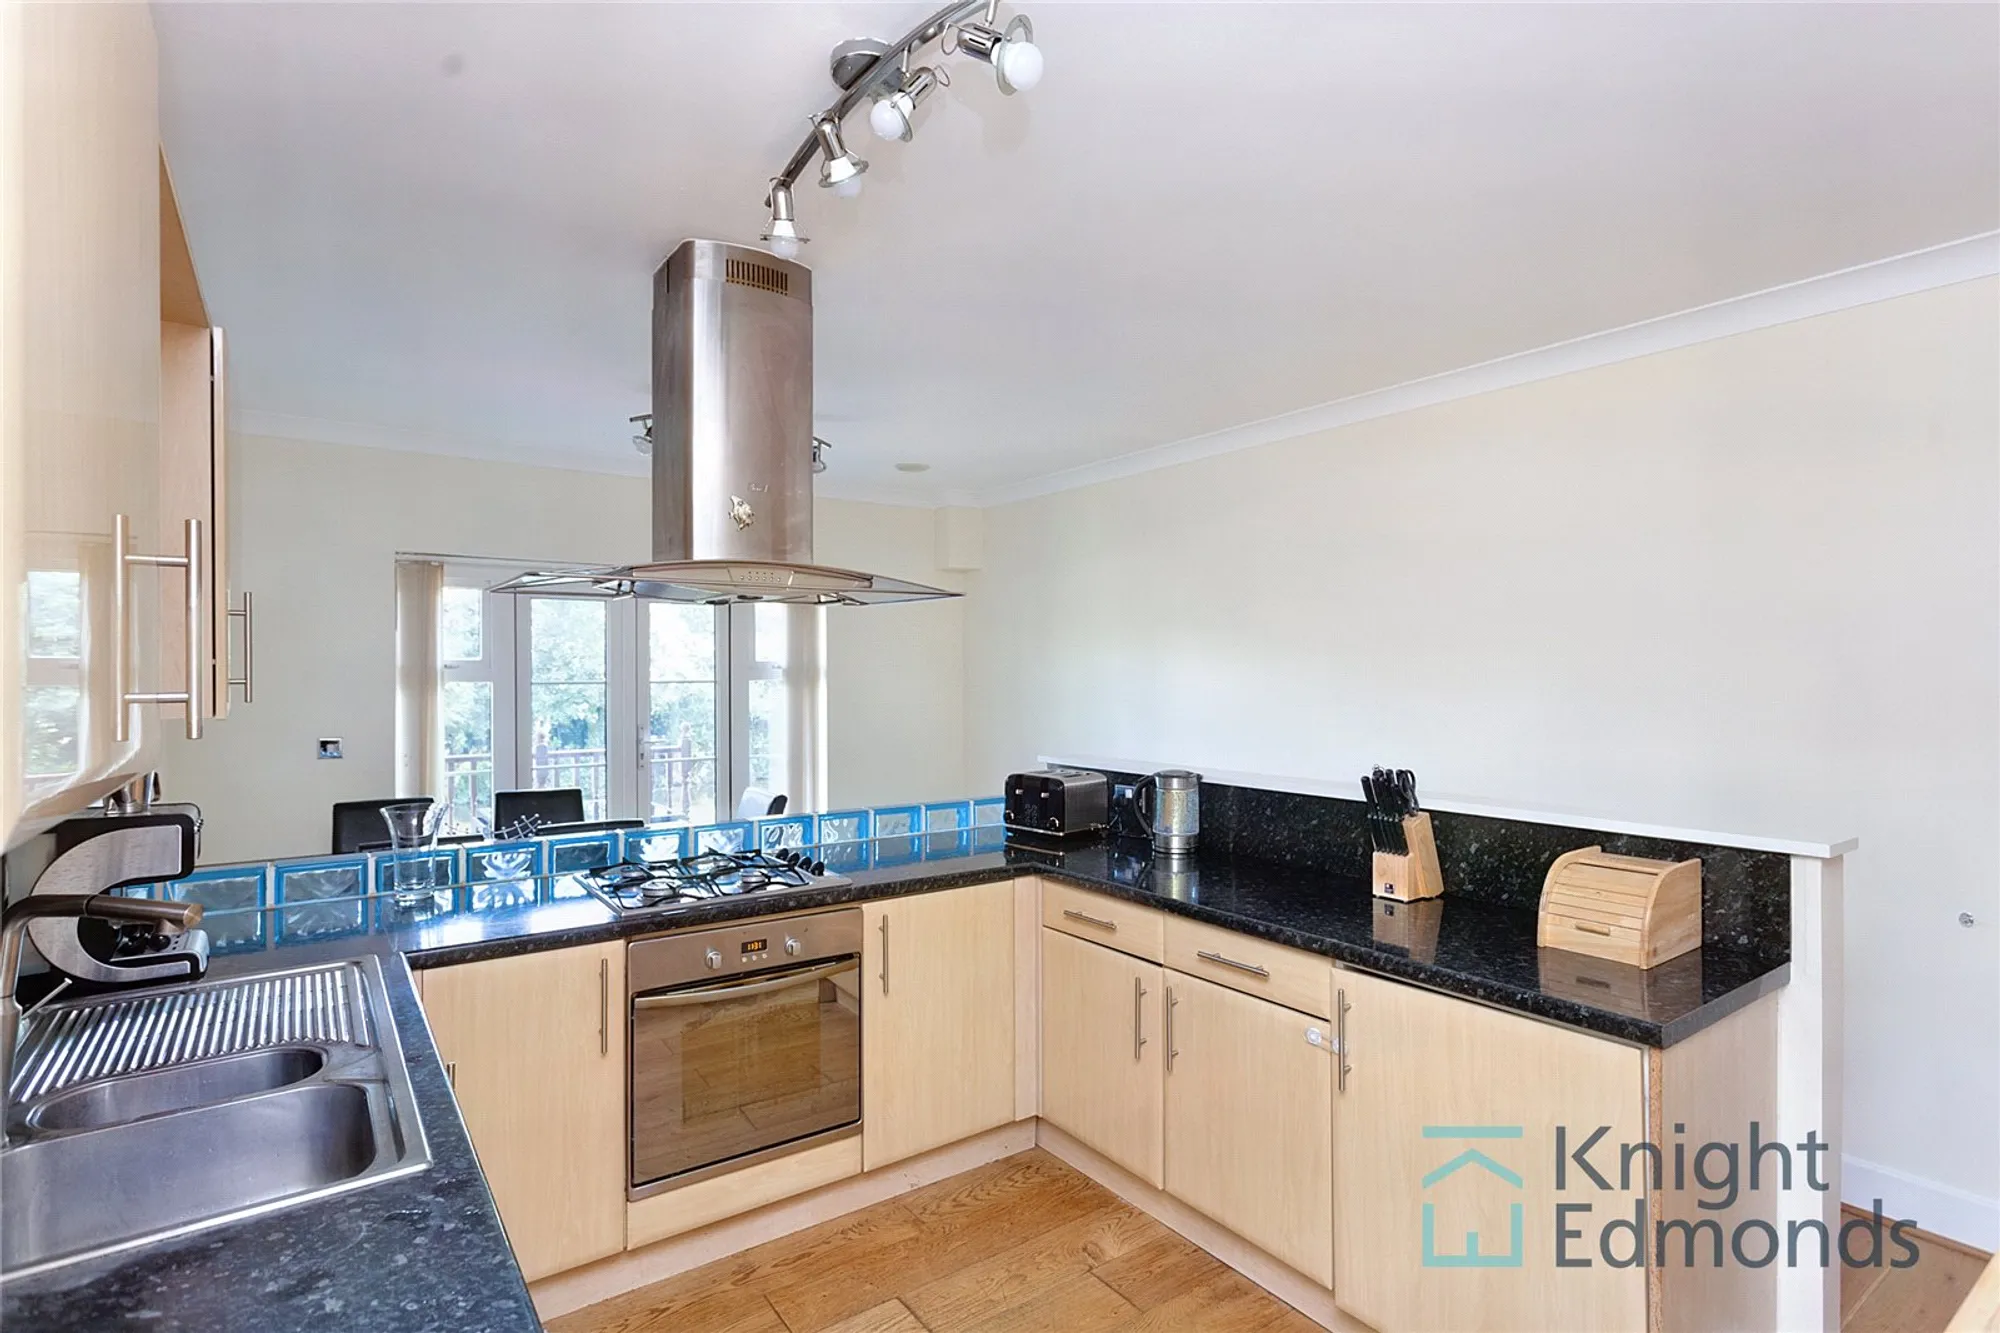 3 bed terraced house for sale in St. Peters Street, Maidstone  - Property Image 2